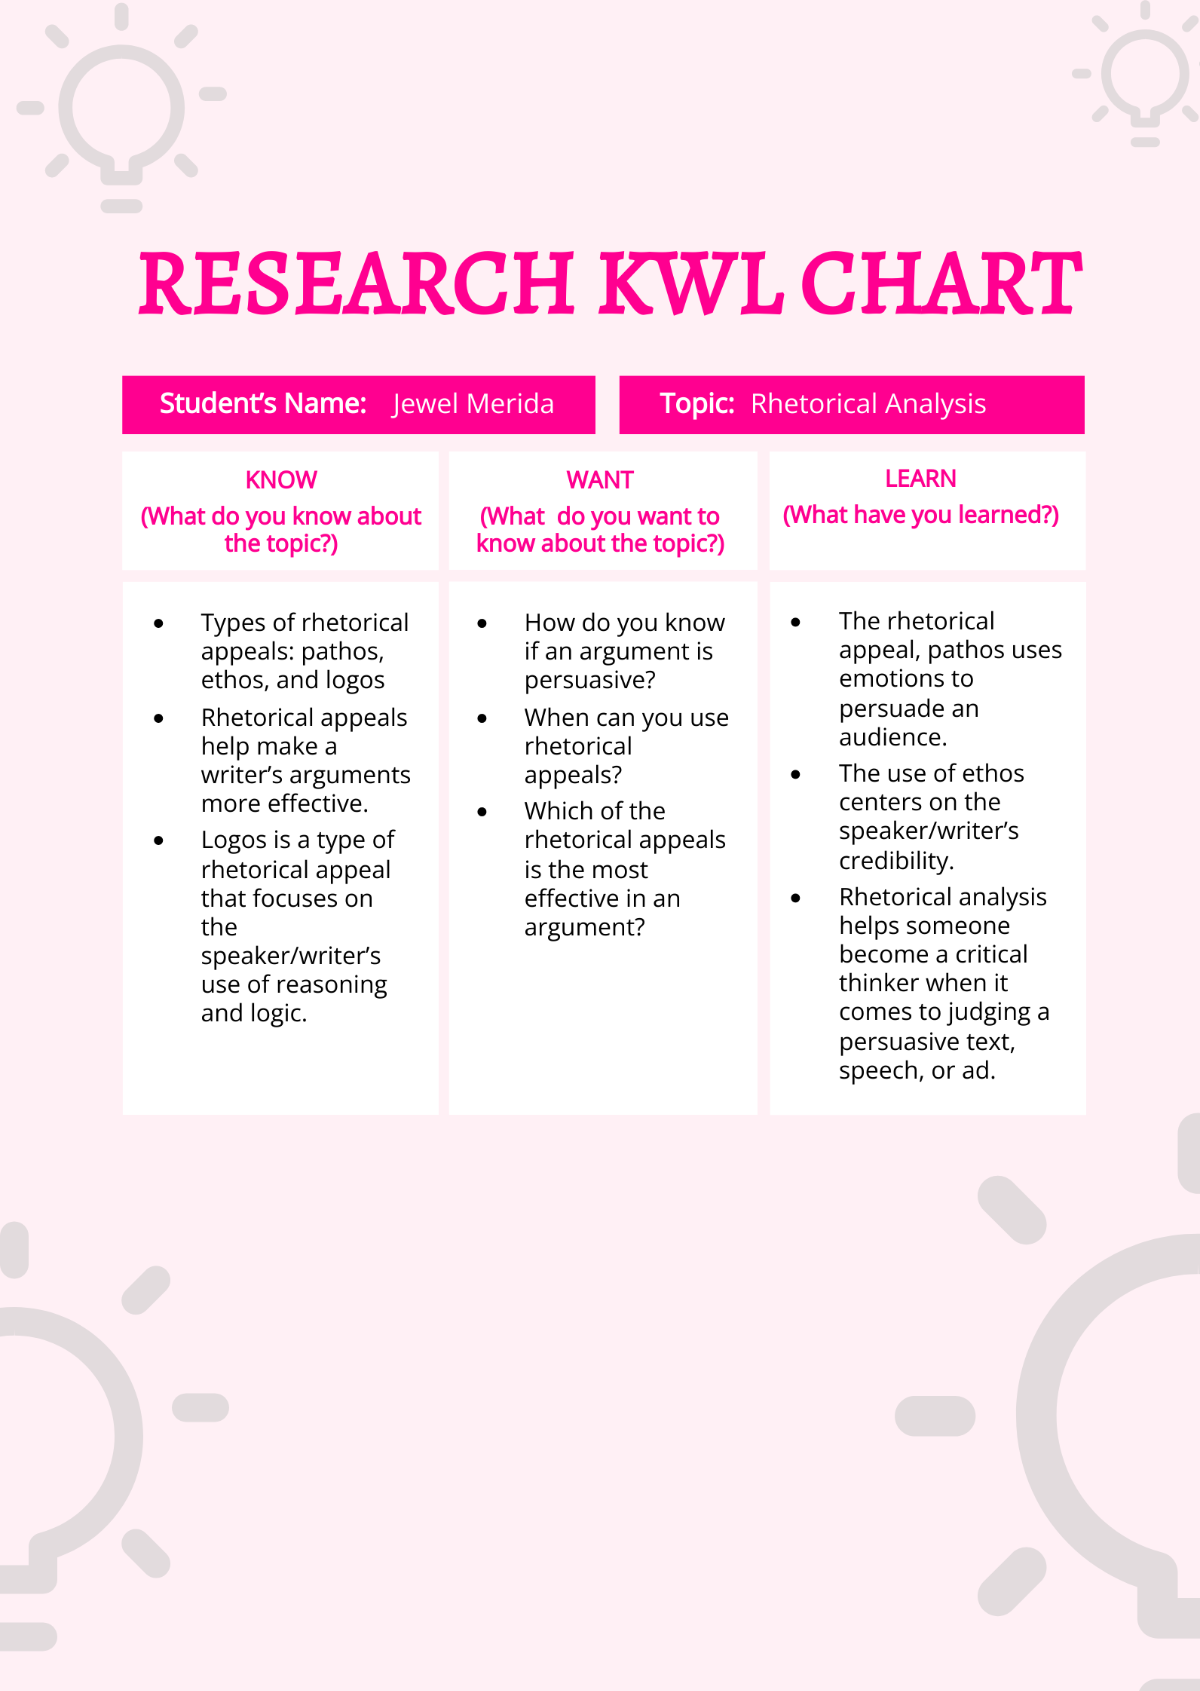 Research KWL Chart Template